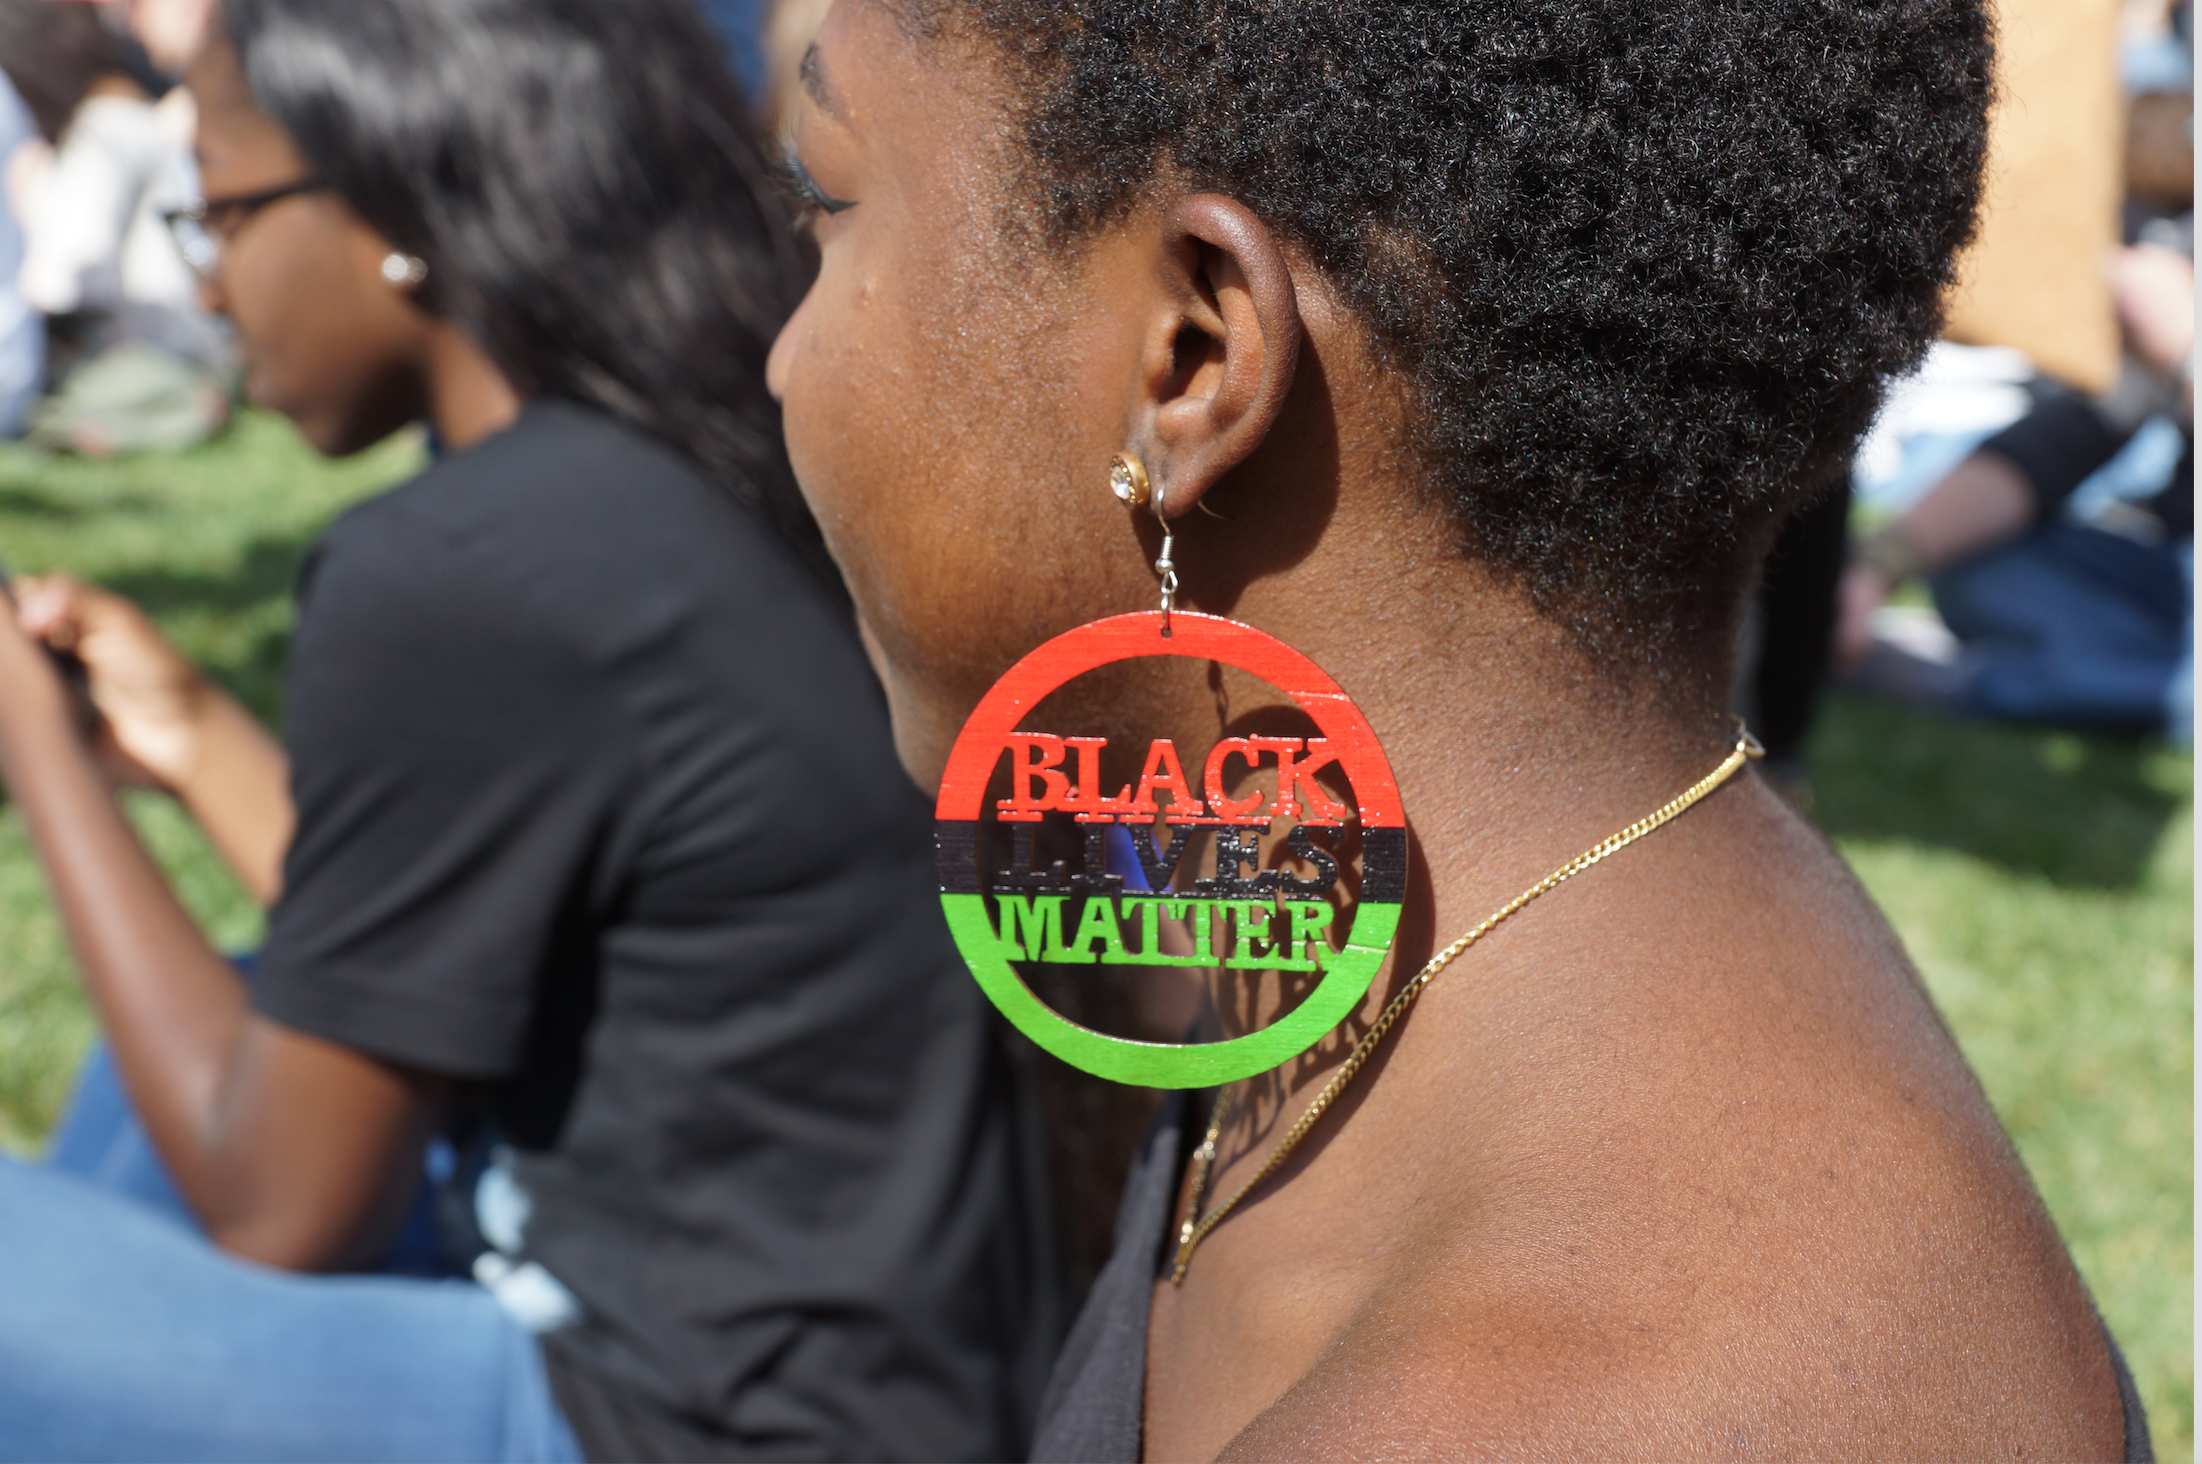 Protestors rally for racial justice and black women’s rights